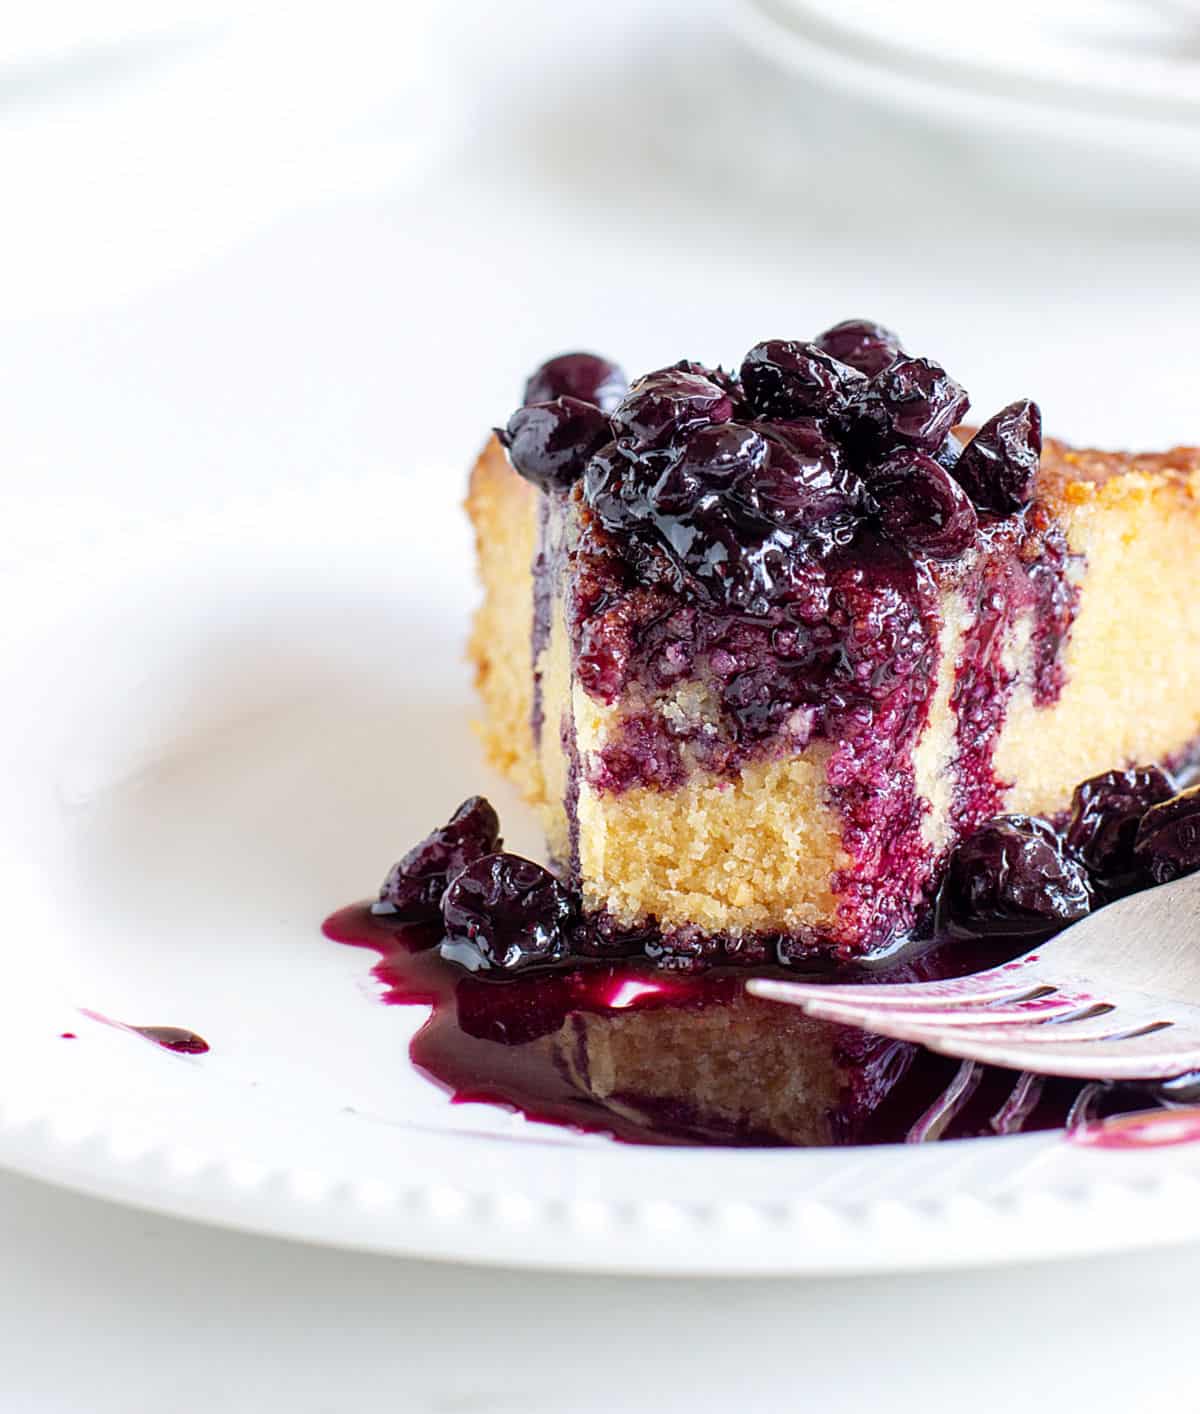 Eaten slice of polenta cake, a pool of blueberry sauce, white plate and background, silver fork.